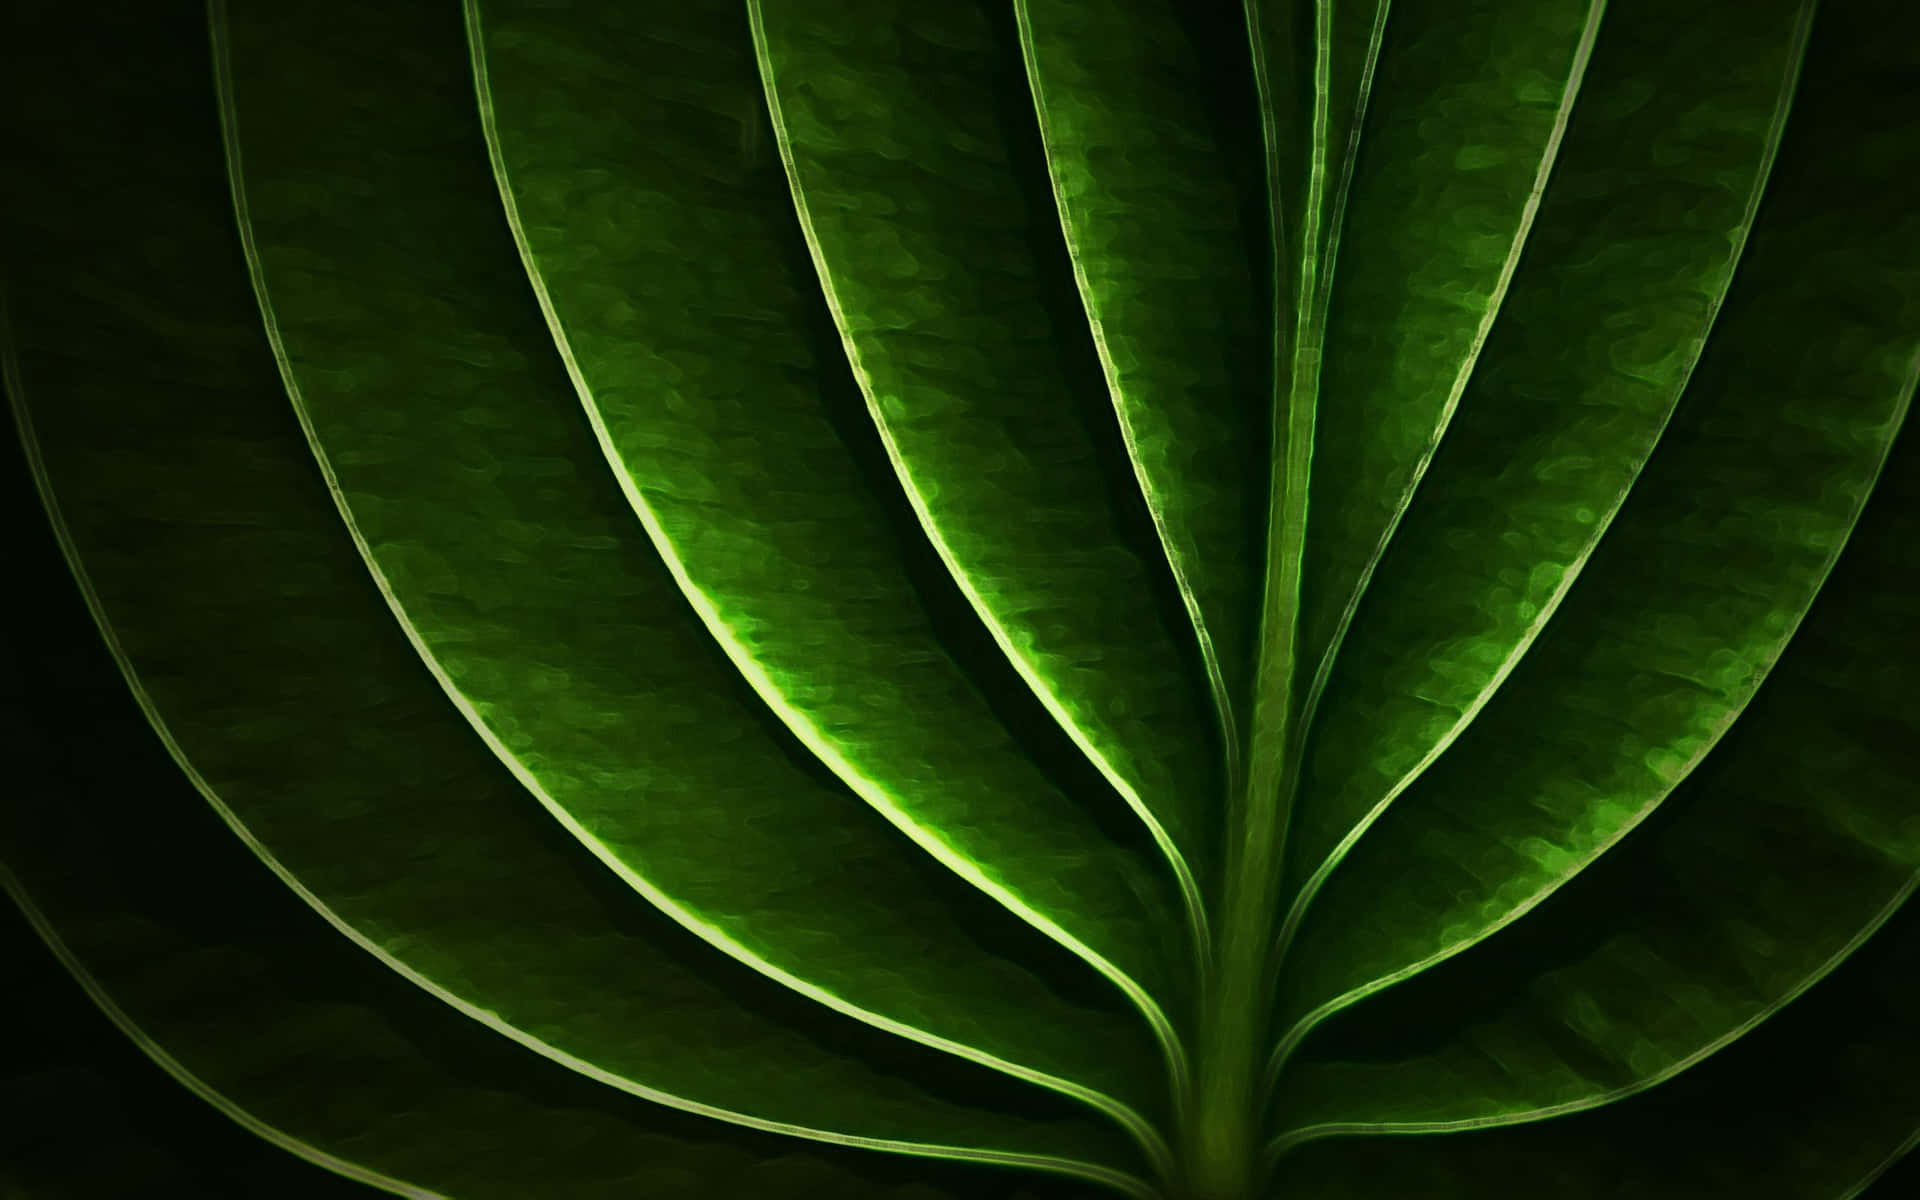 Nature at its finest - get closer to the beauty of this leaf